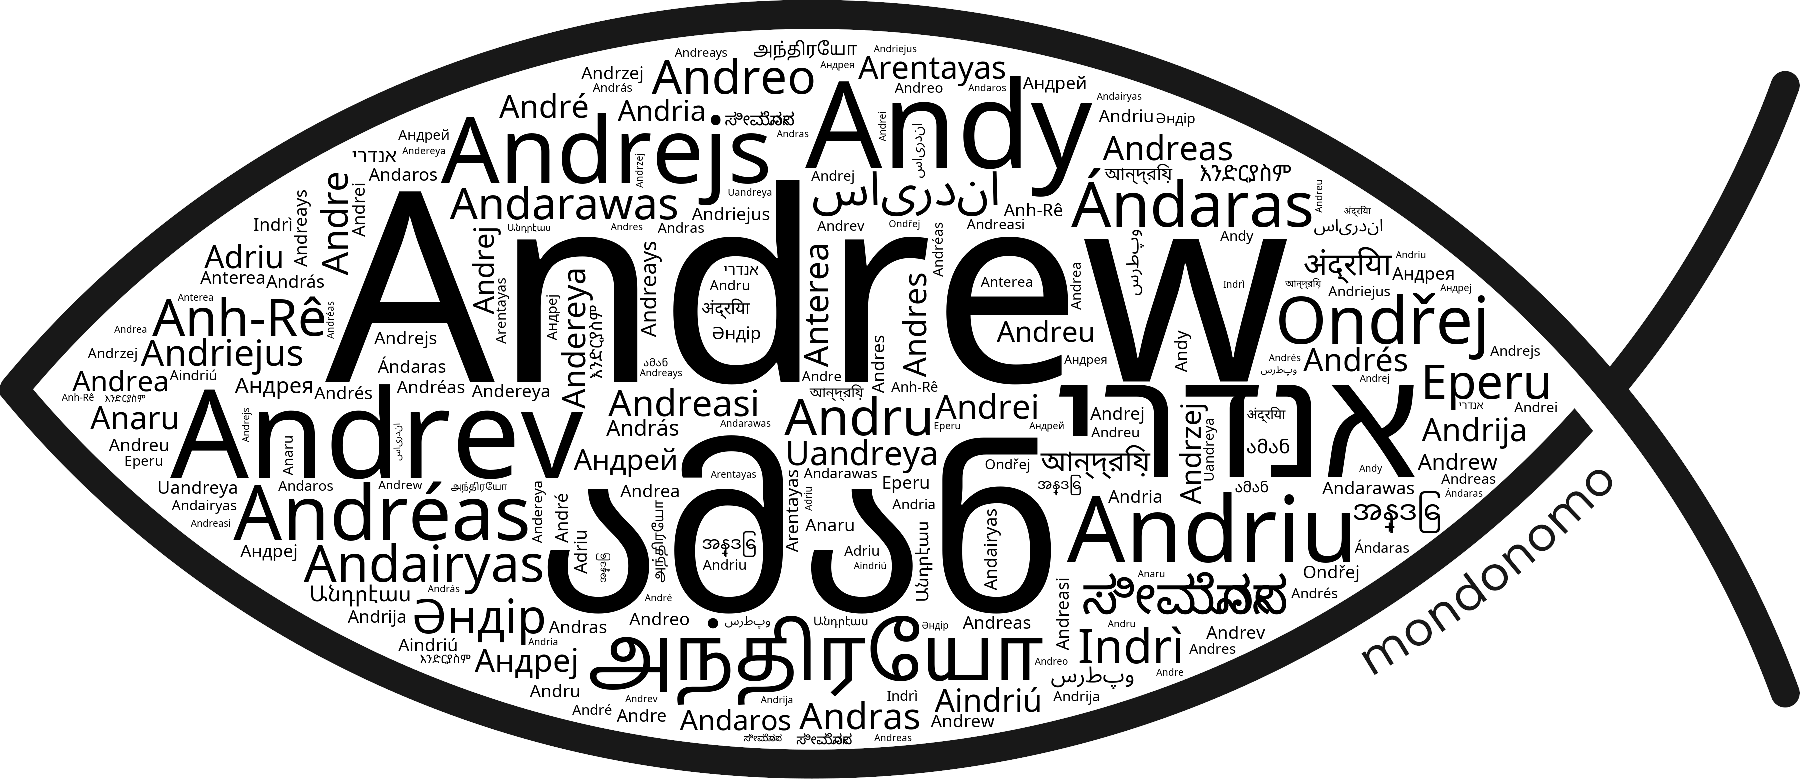 Name Andrew in the world's Bibles